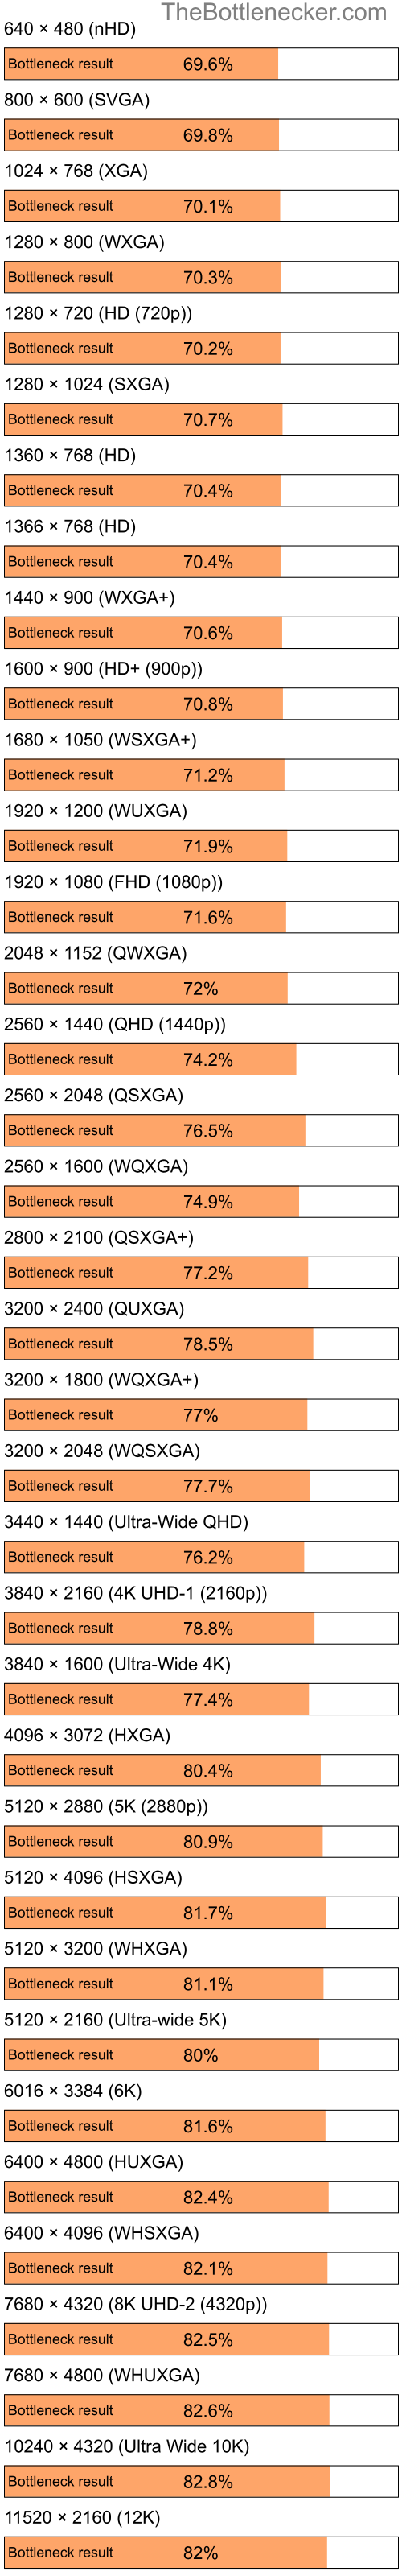 Bottleneck results by resolution for Intel Pentium 4 and AMD Radeon X550 in General Tasks